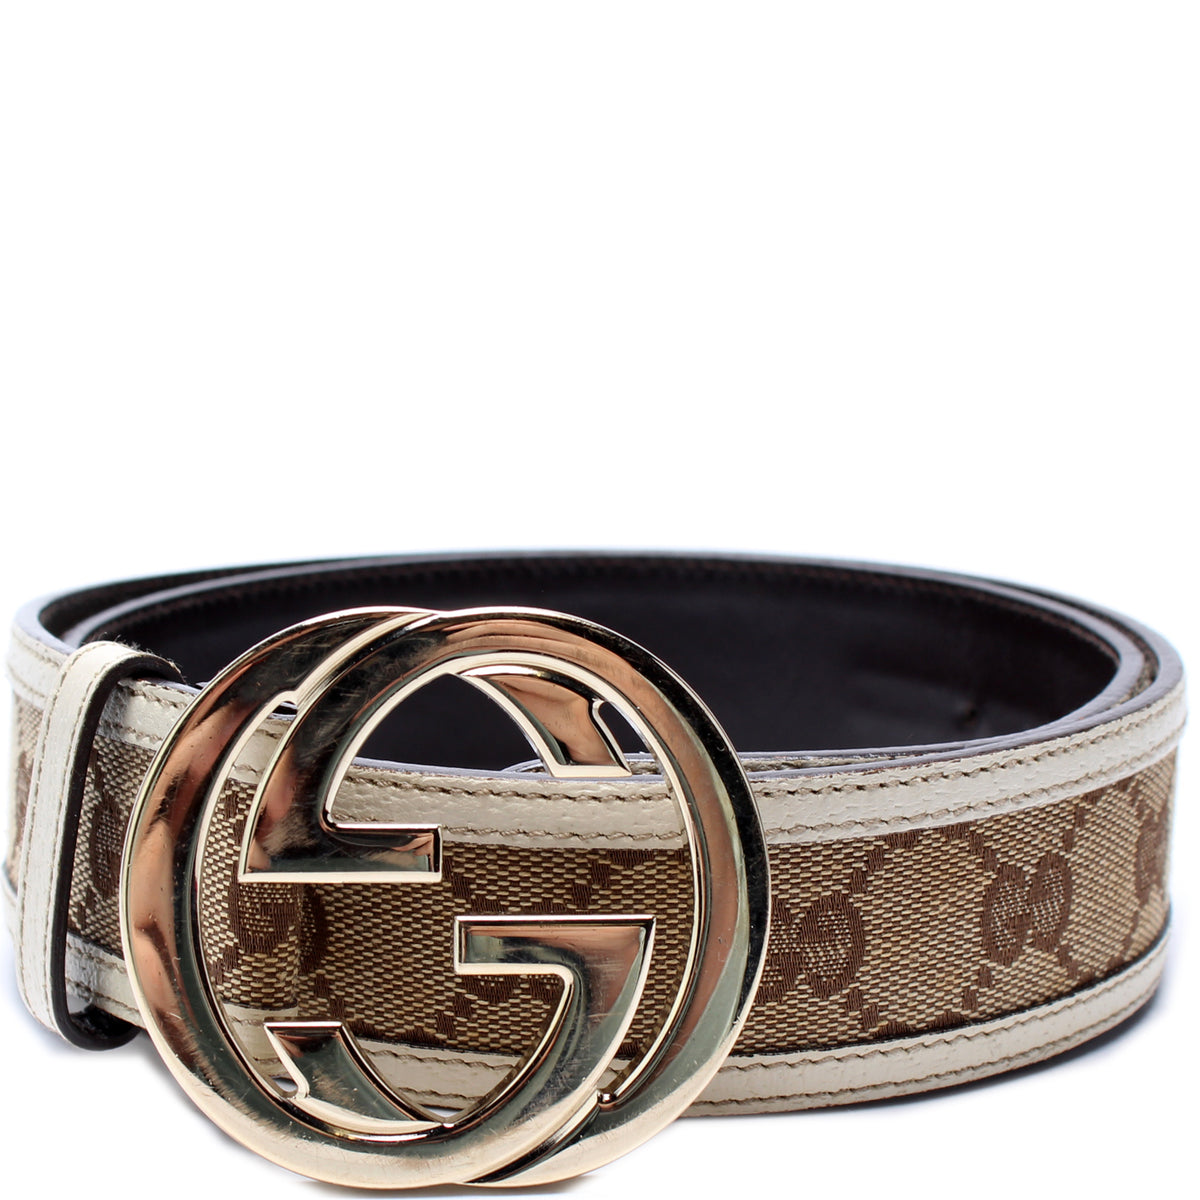 Gucci Belt Monogram Beige/Off White in Canvas Leather with Light